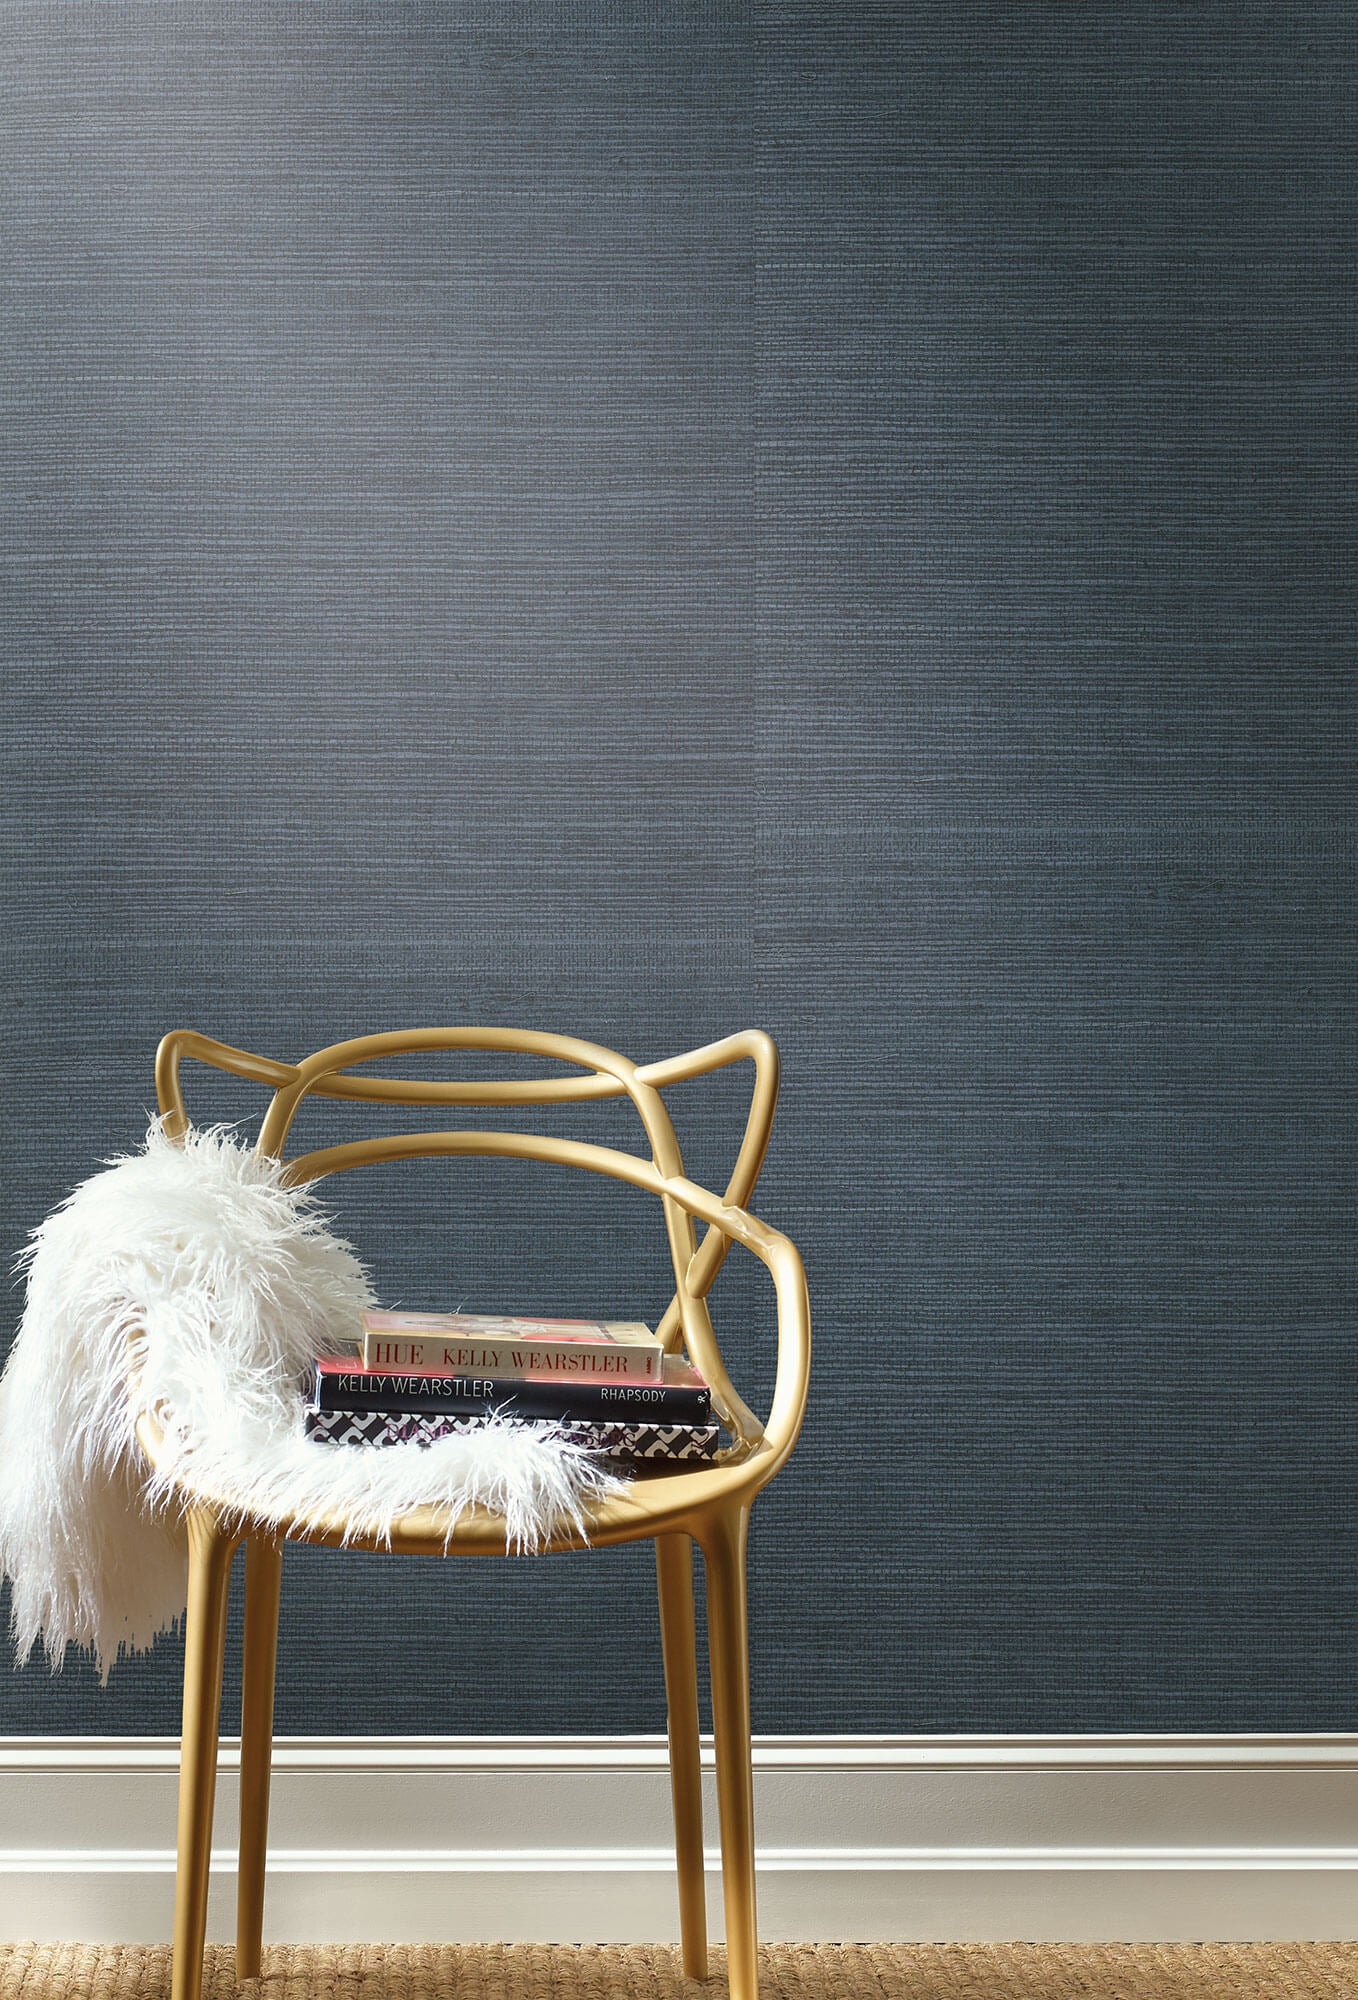 Grasscloth Wallpaper in the Dining Room  Chrissy Marie Blog